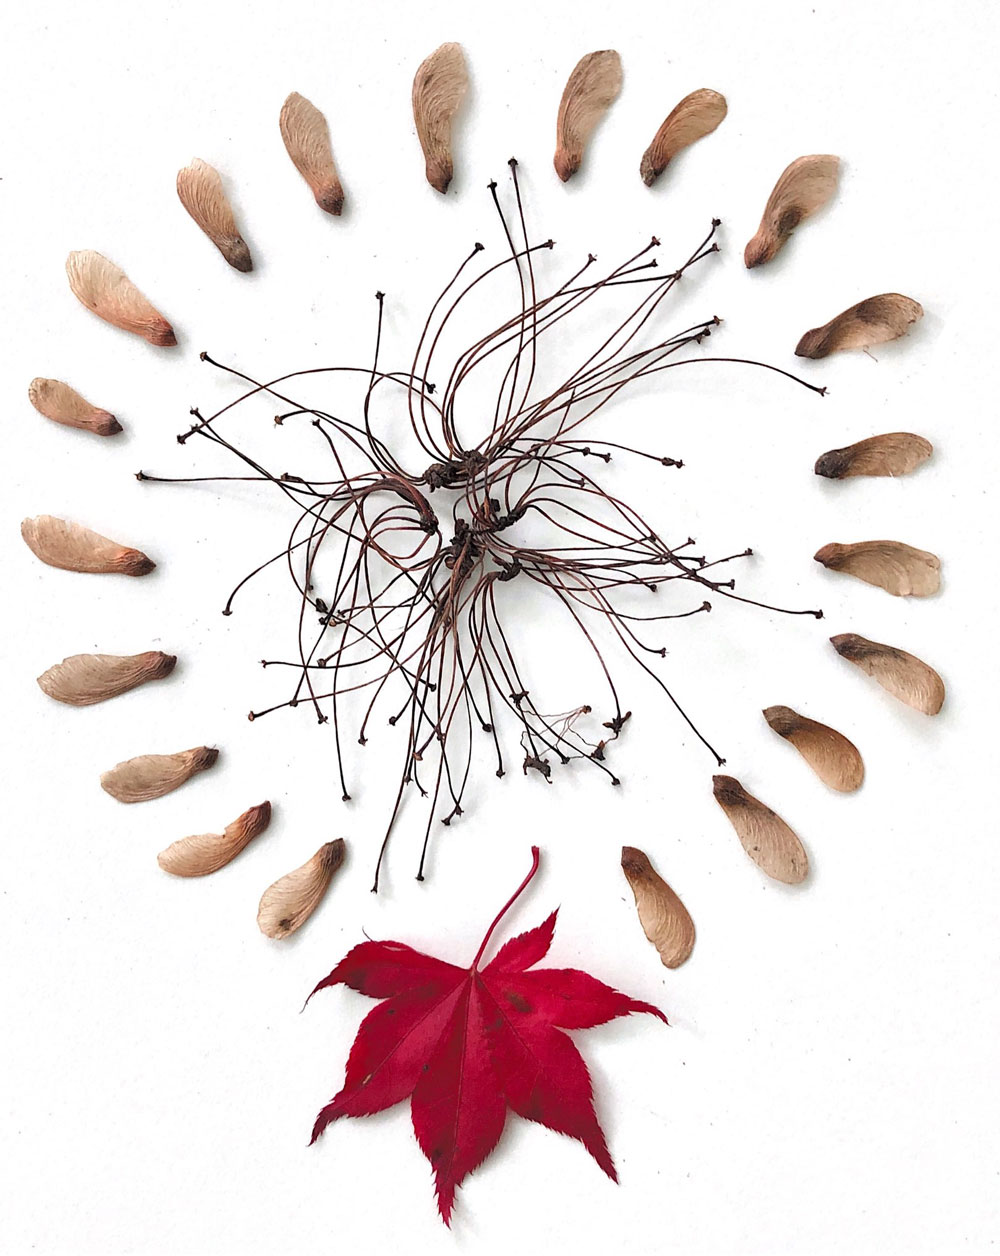 mandala of natural materials: whirligigs in a circle with a red maple leaf at the bottom. In the center, small clusters of twigs